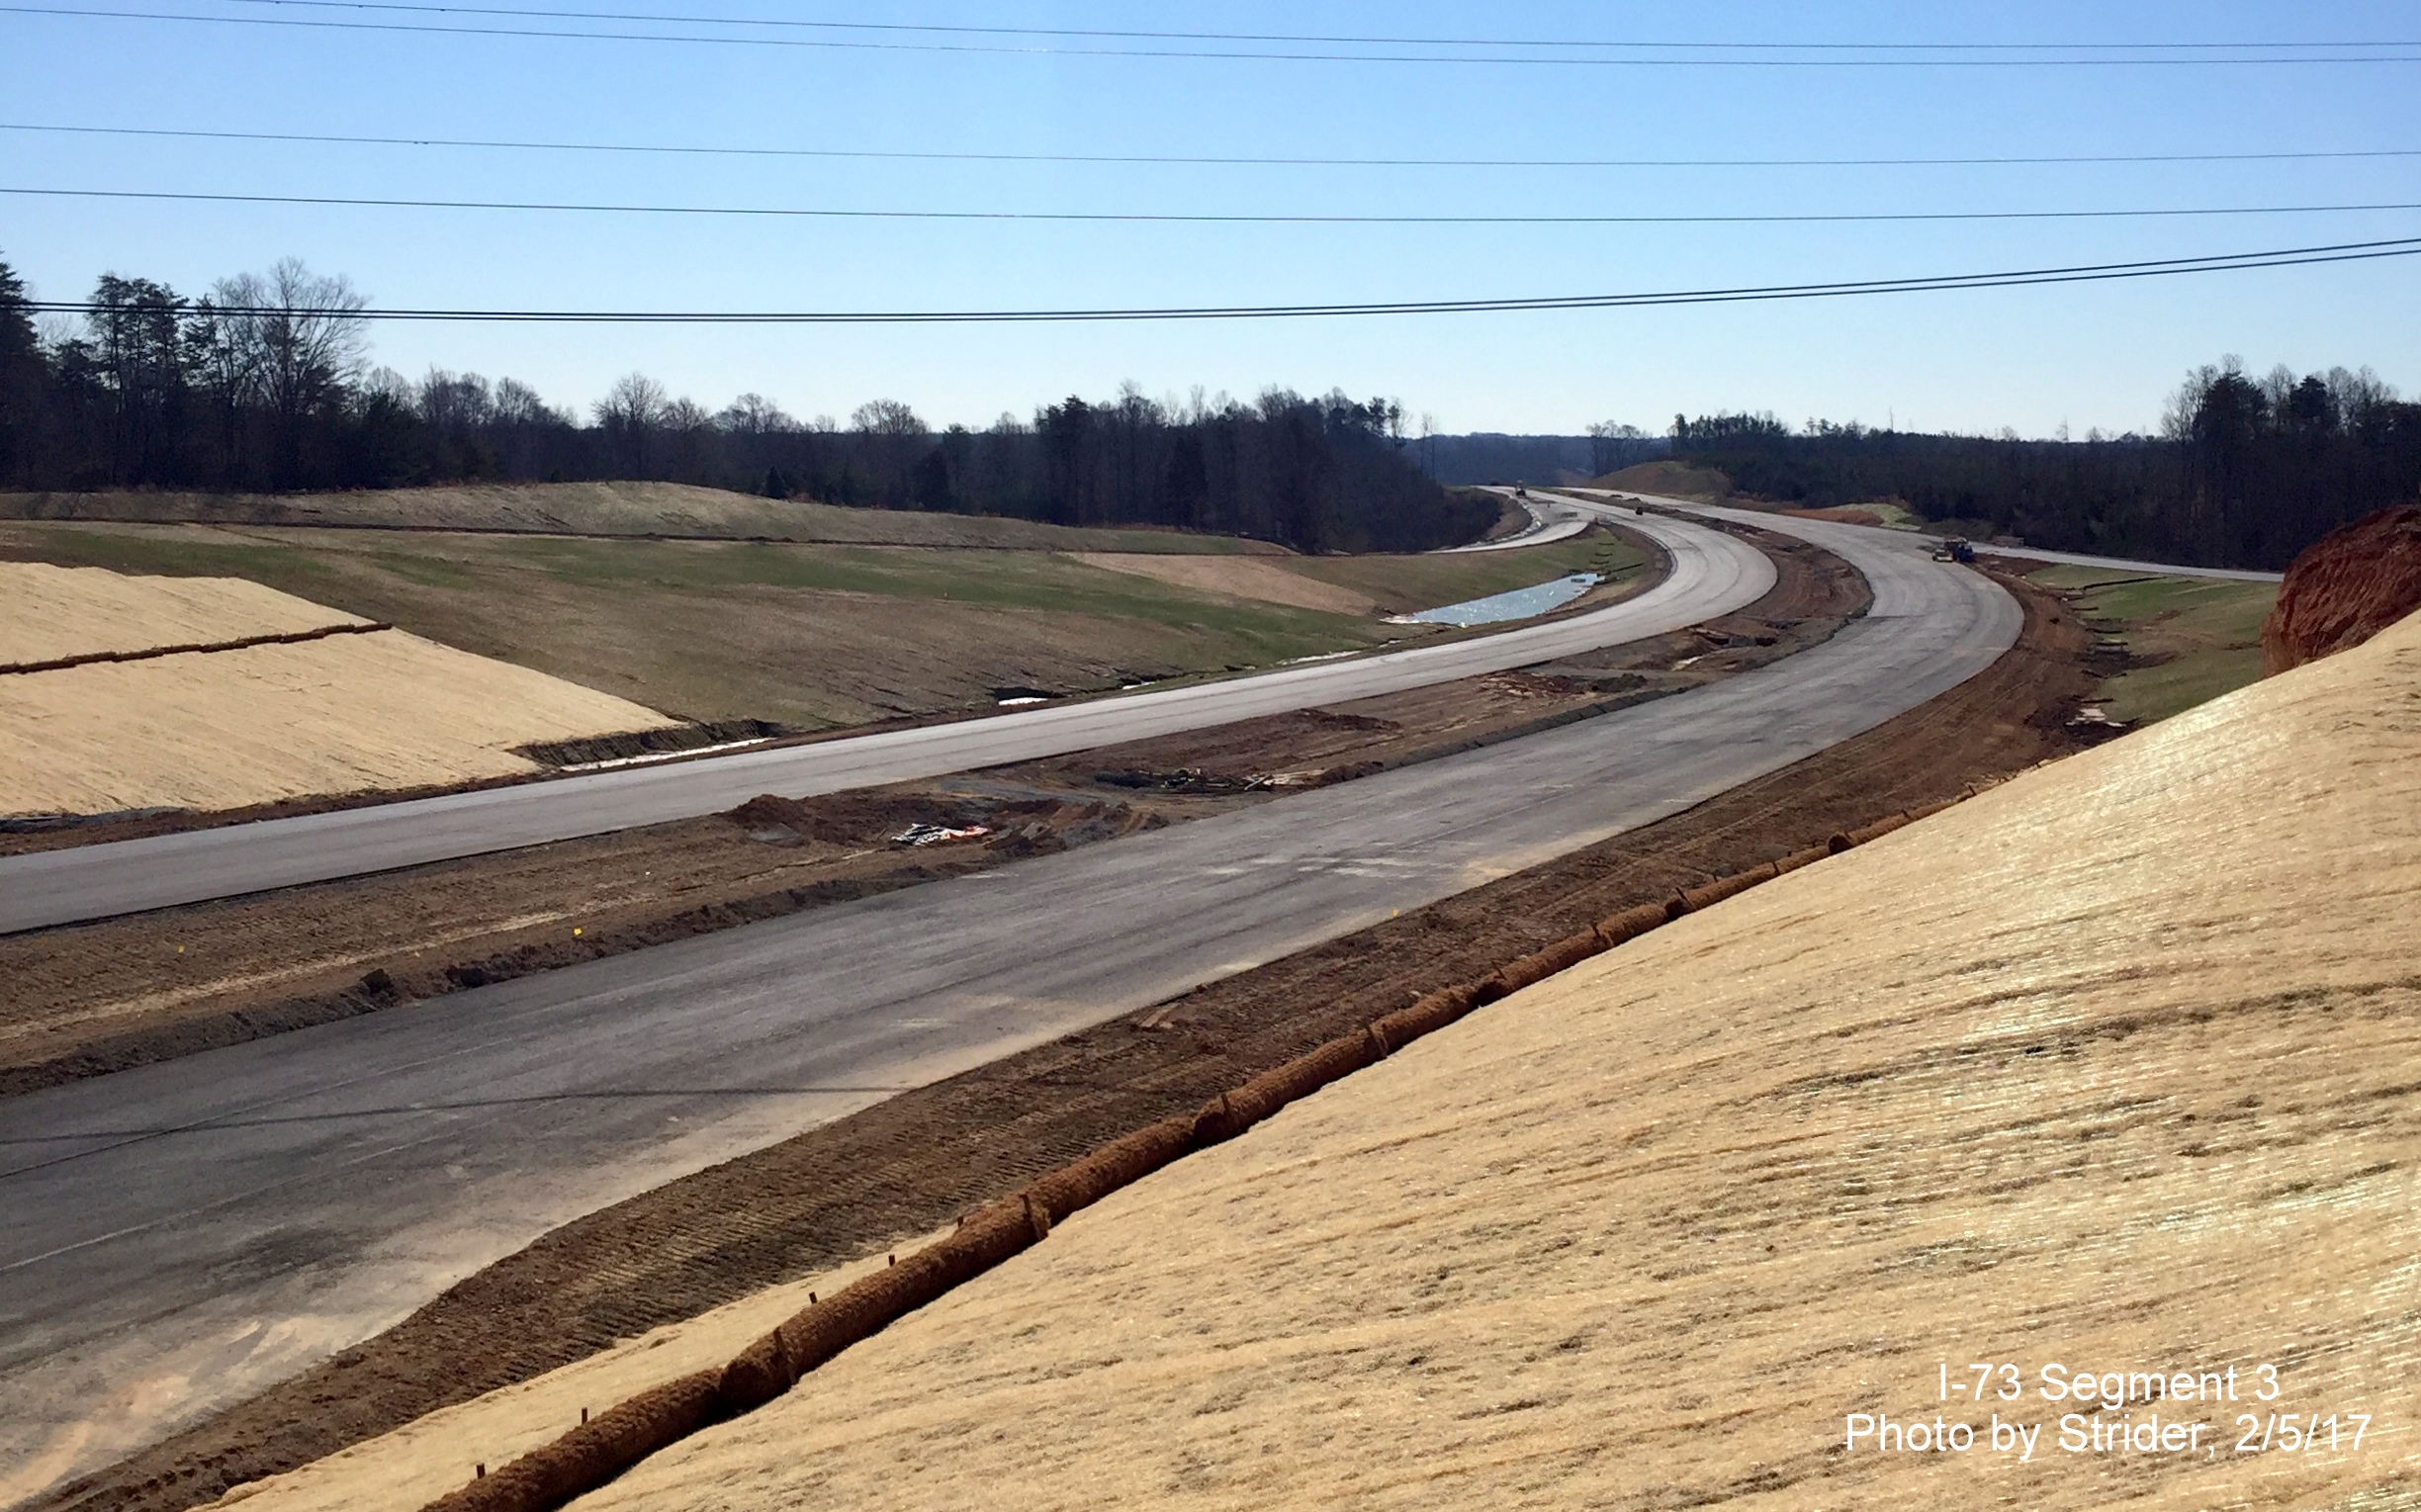 Image of view looking south from NC 150 bridge showing progress paving future I-73 lanes, from Strider